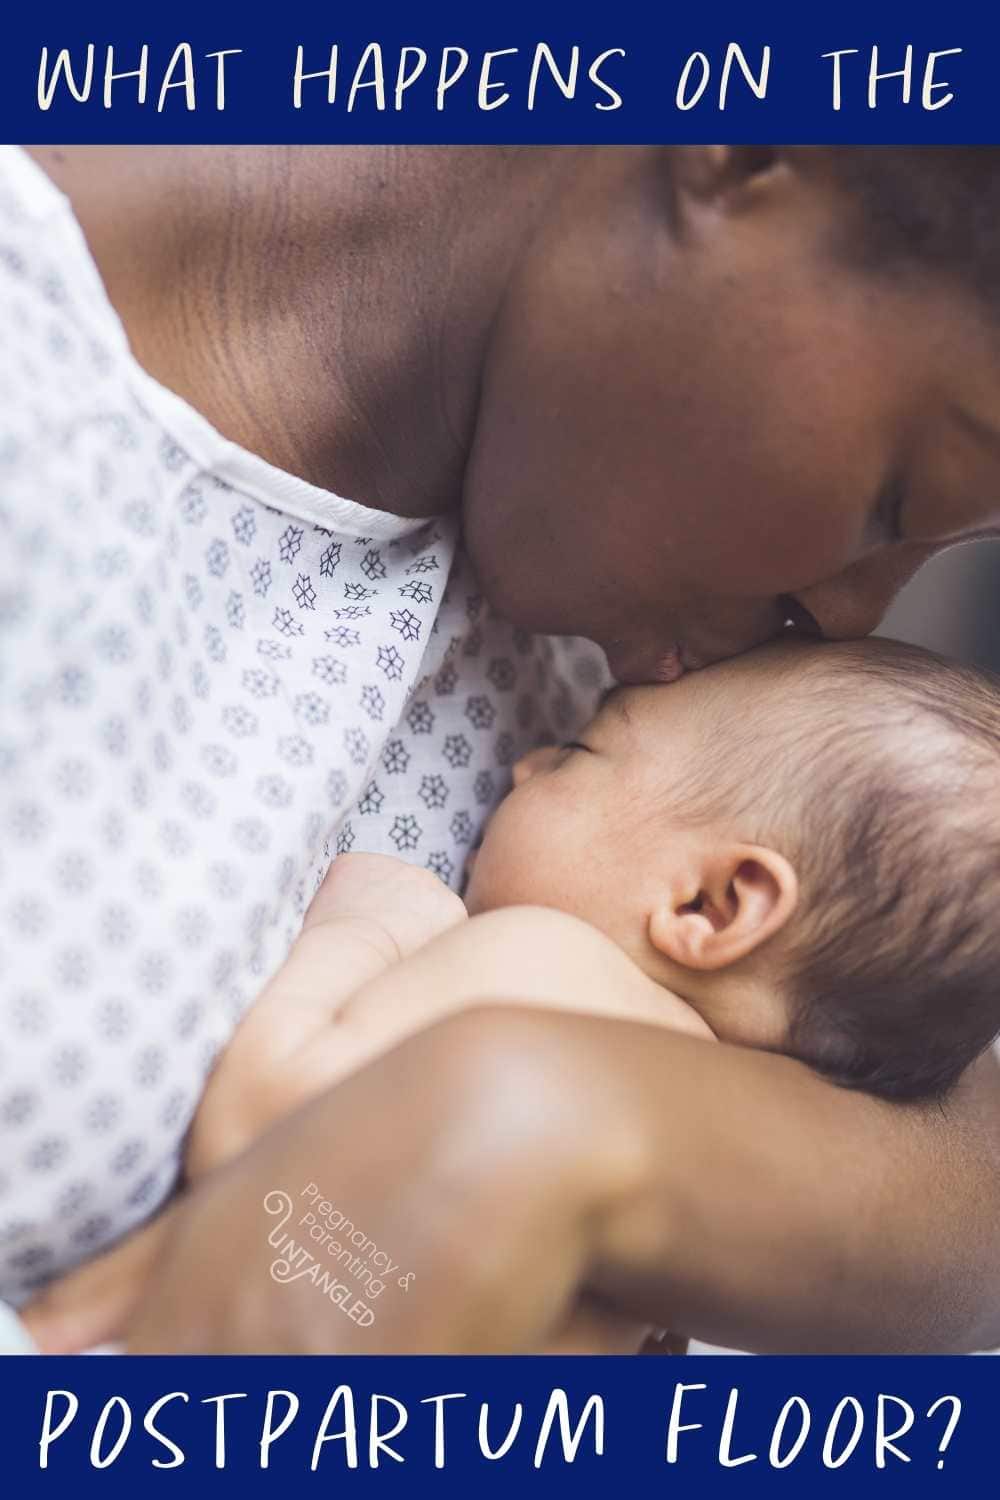 After you have your baby you may be transferred to another unit (every hospital calls it it's own name) and today we're talking about how to get the MOST out of your care in that spot. via @pullingcurls